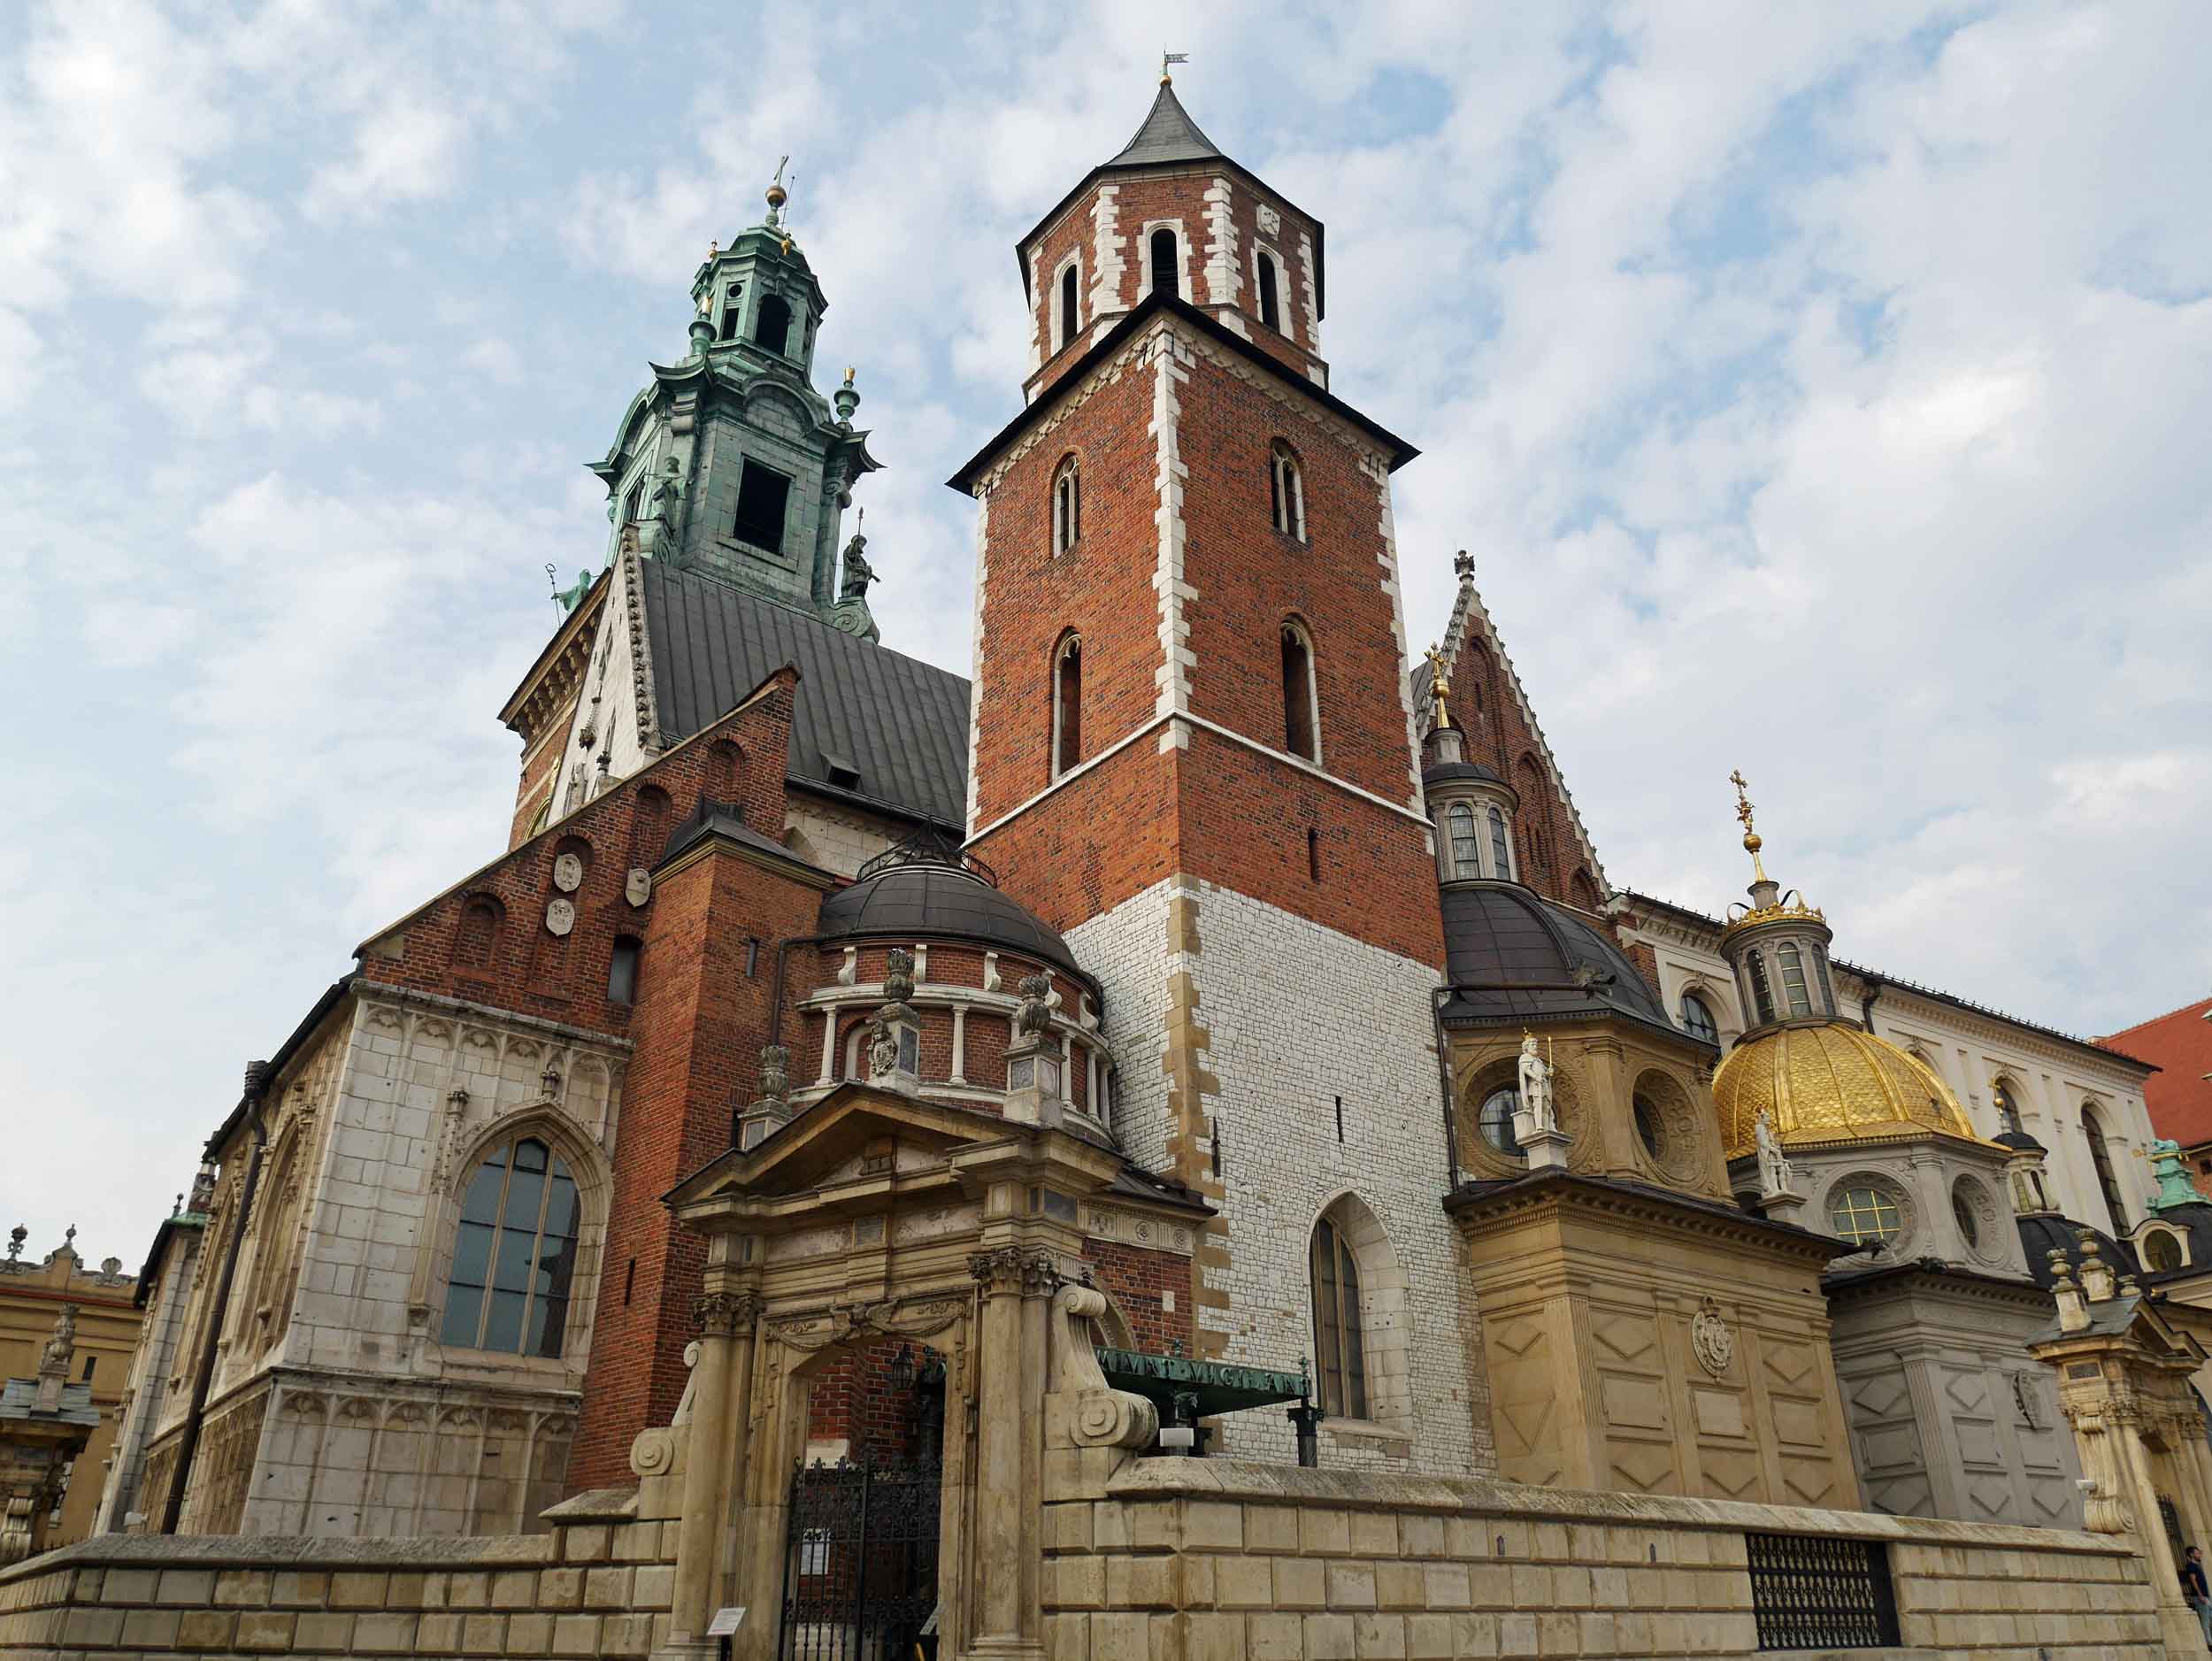  Since it’s origin in the 11th century, Wawel – or known simply as The Royal- Cathedral has witnessed many coronations, funerals and burials of Poland’s monarchs and strongmen. 